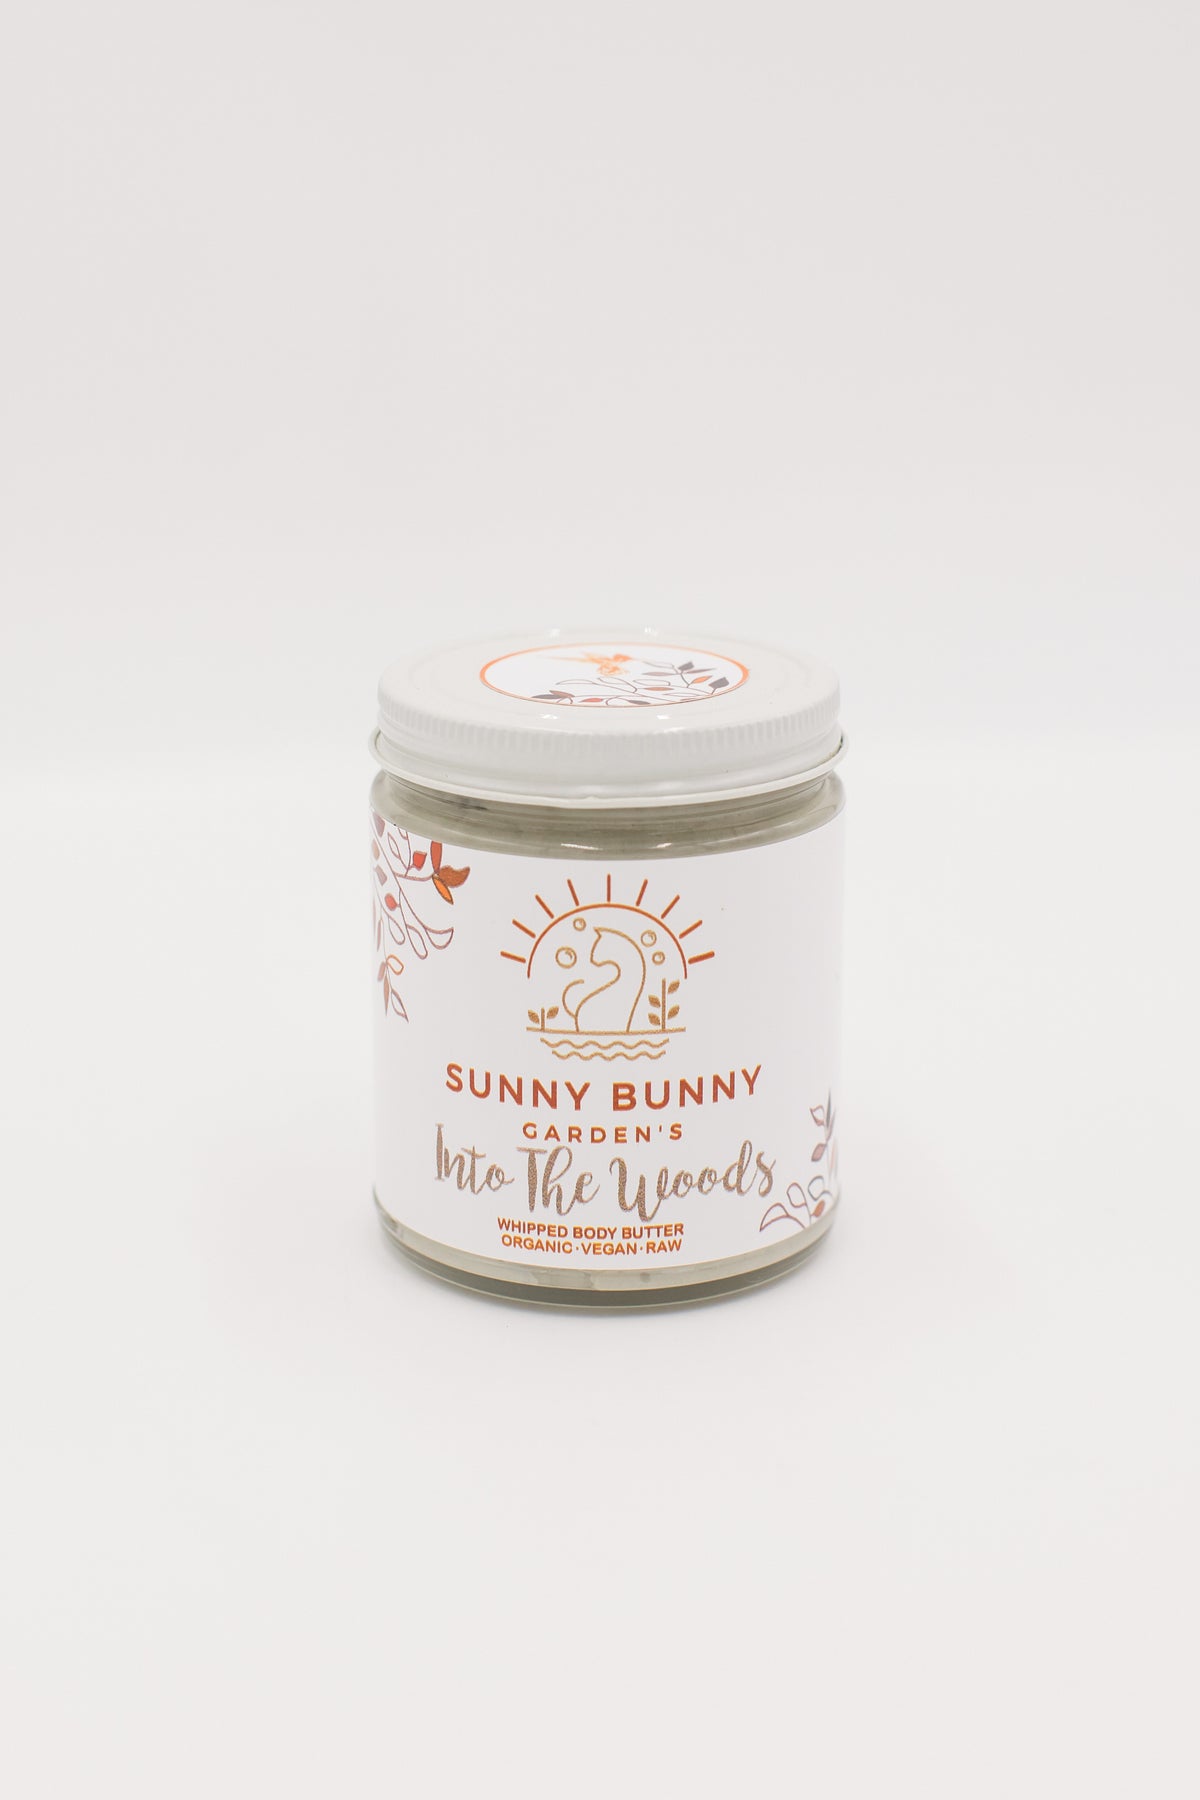 Into The Woods Whipped Body Butter- Ltd Edition